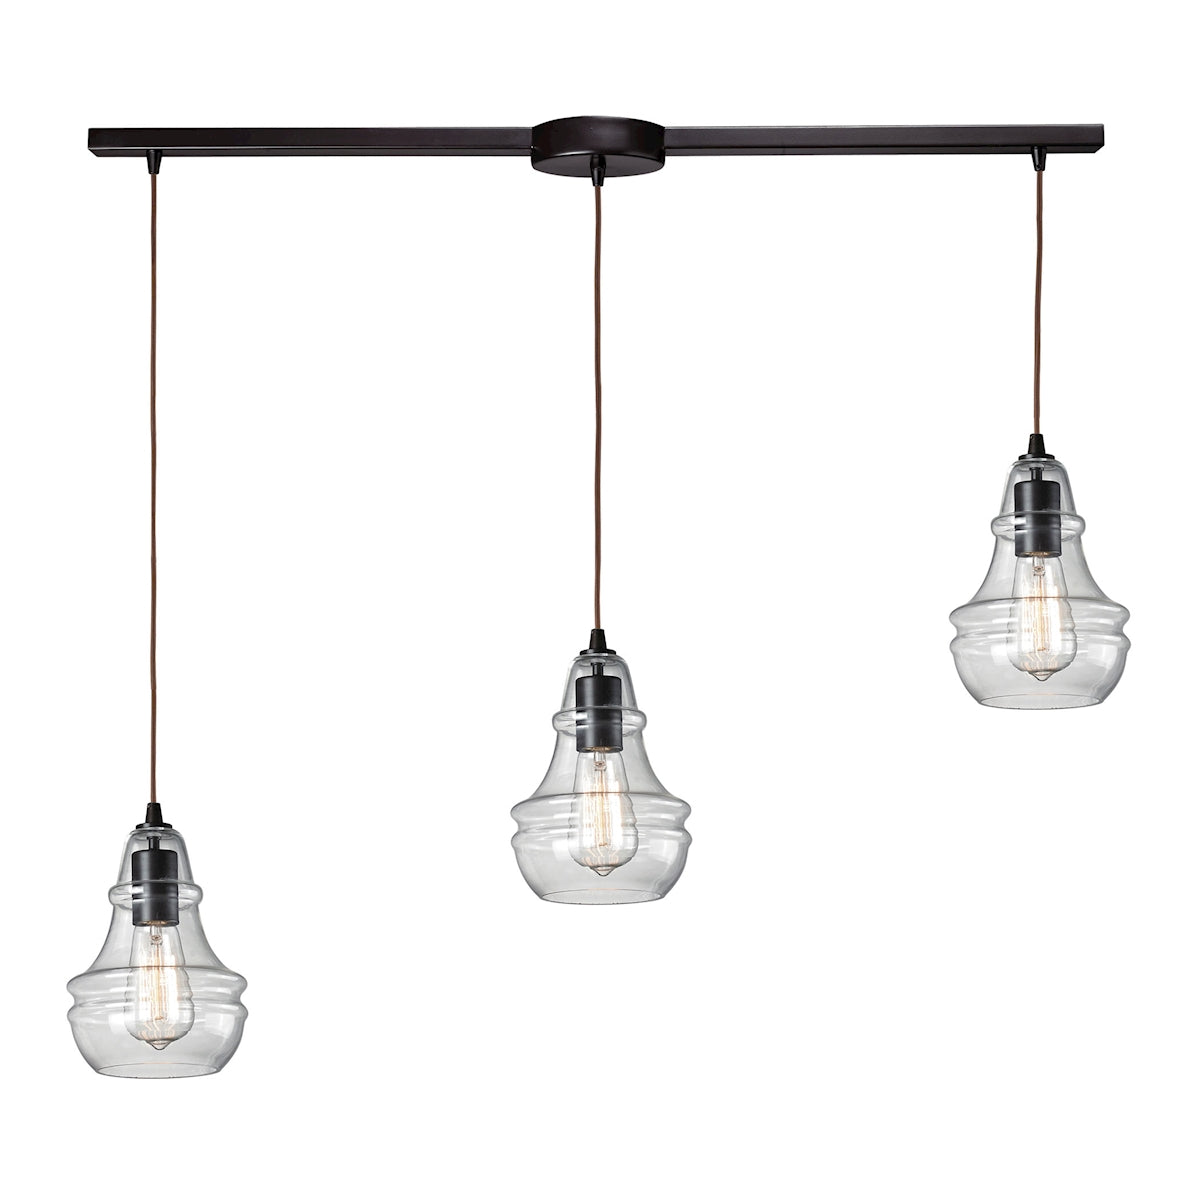 ELK Lighting 60047-3L Menlow Park 3-Light Linear Pendant Fixture in Oiled Bronze with Smoked Glass